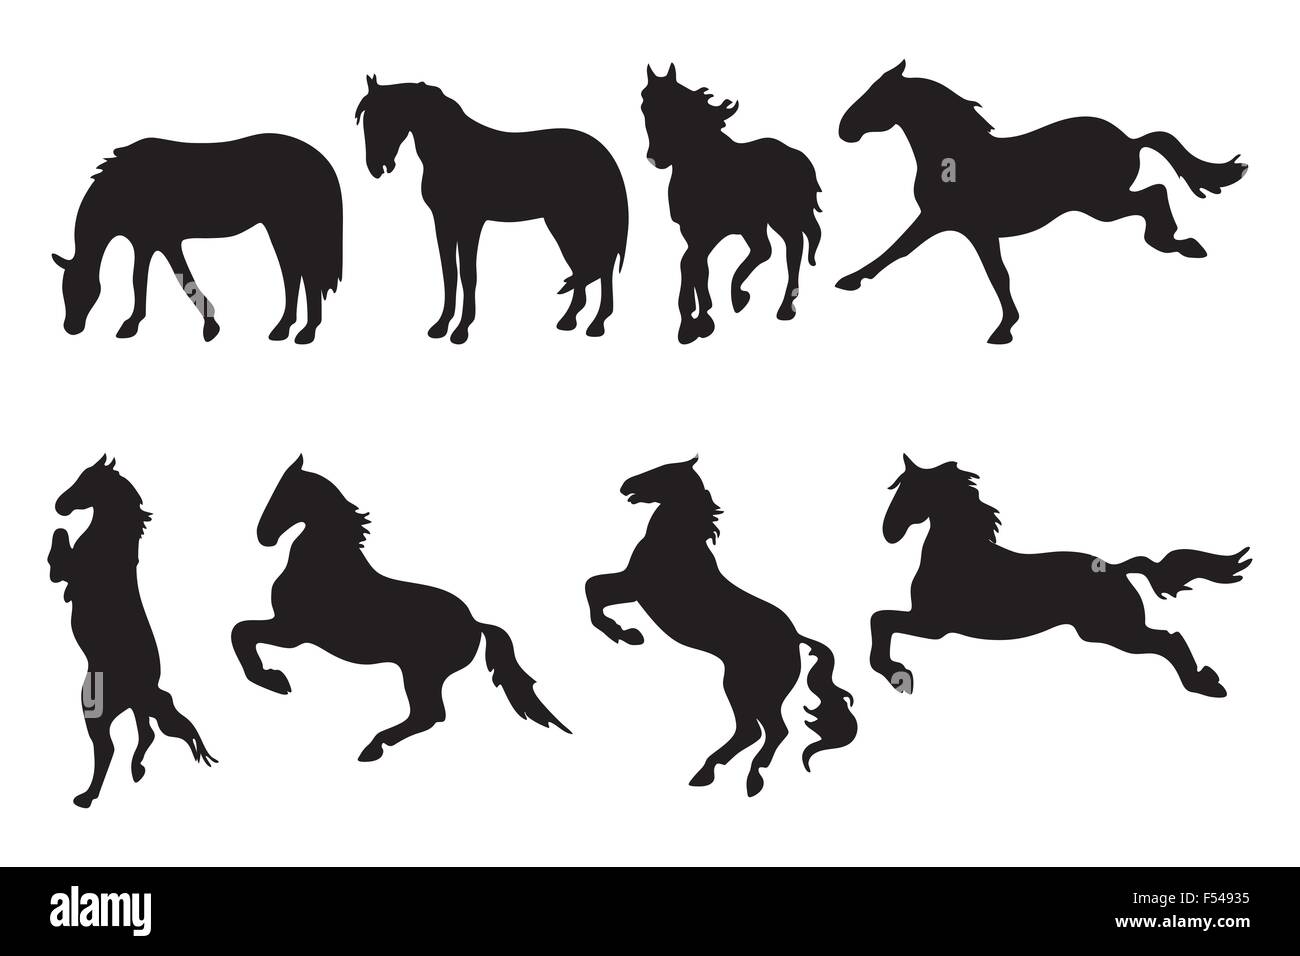 Collection of different silhouettes of horses - vector illustration isolated on white background Stock Vector